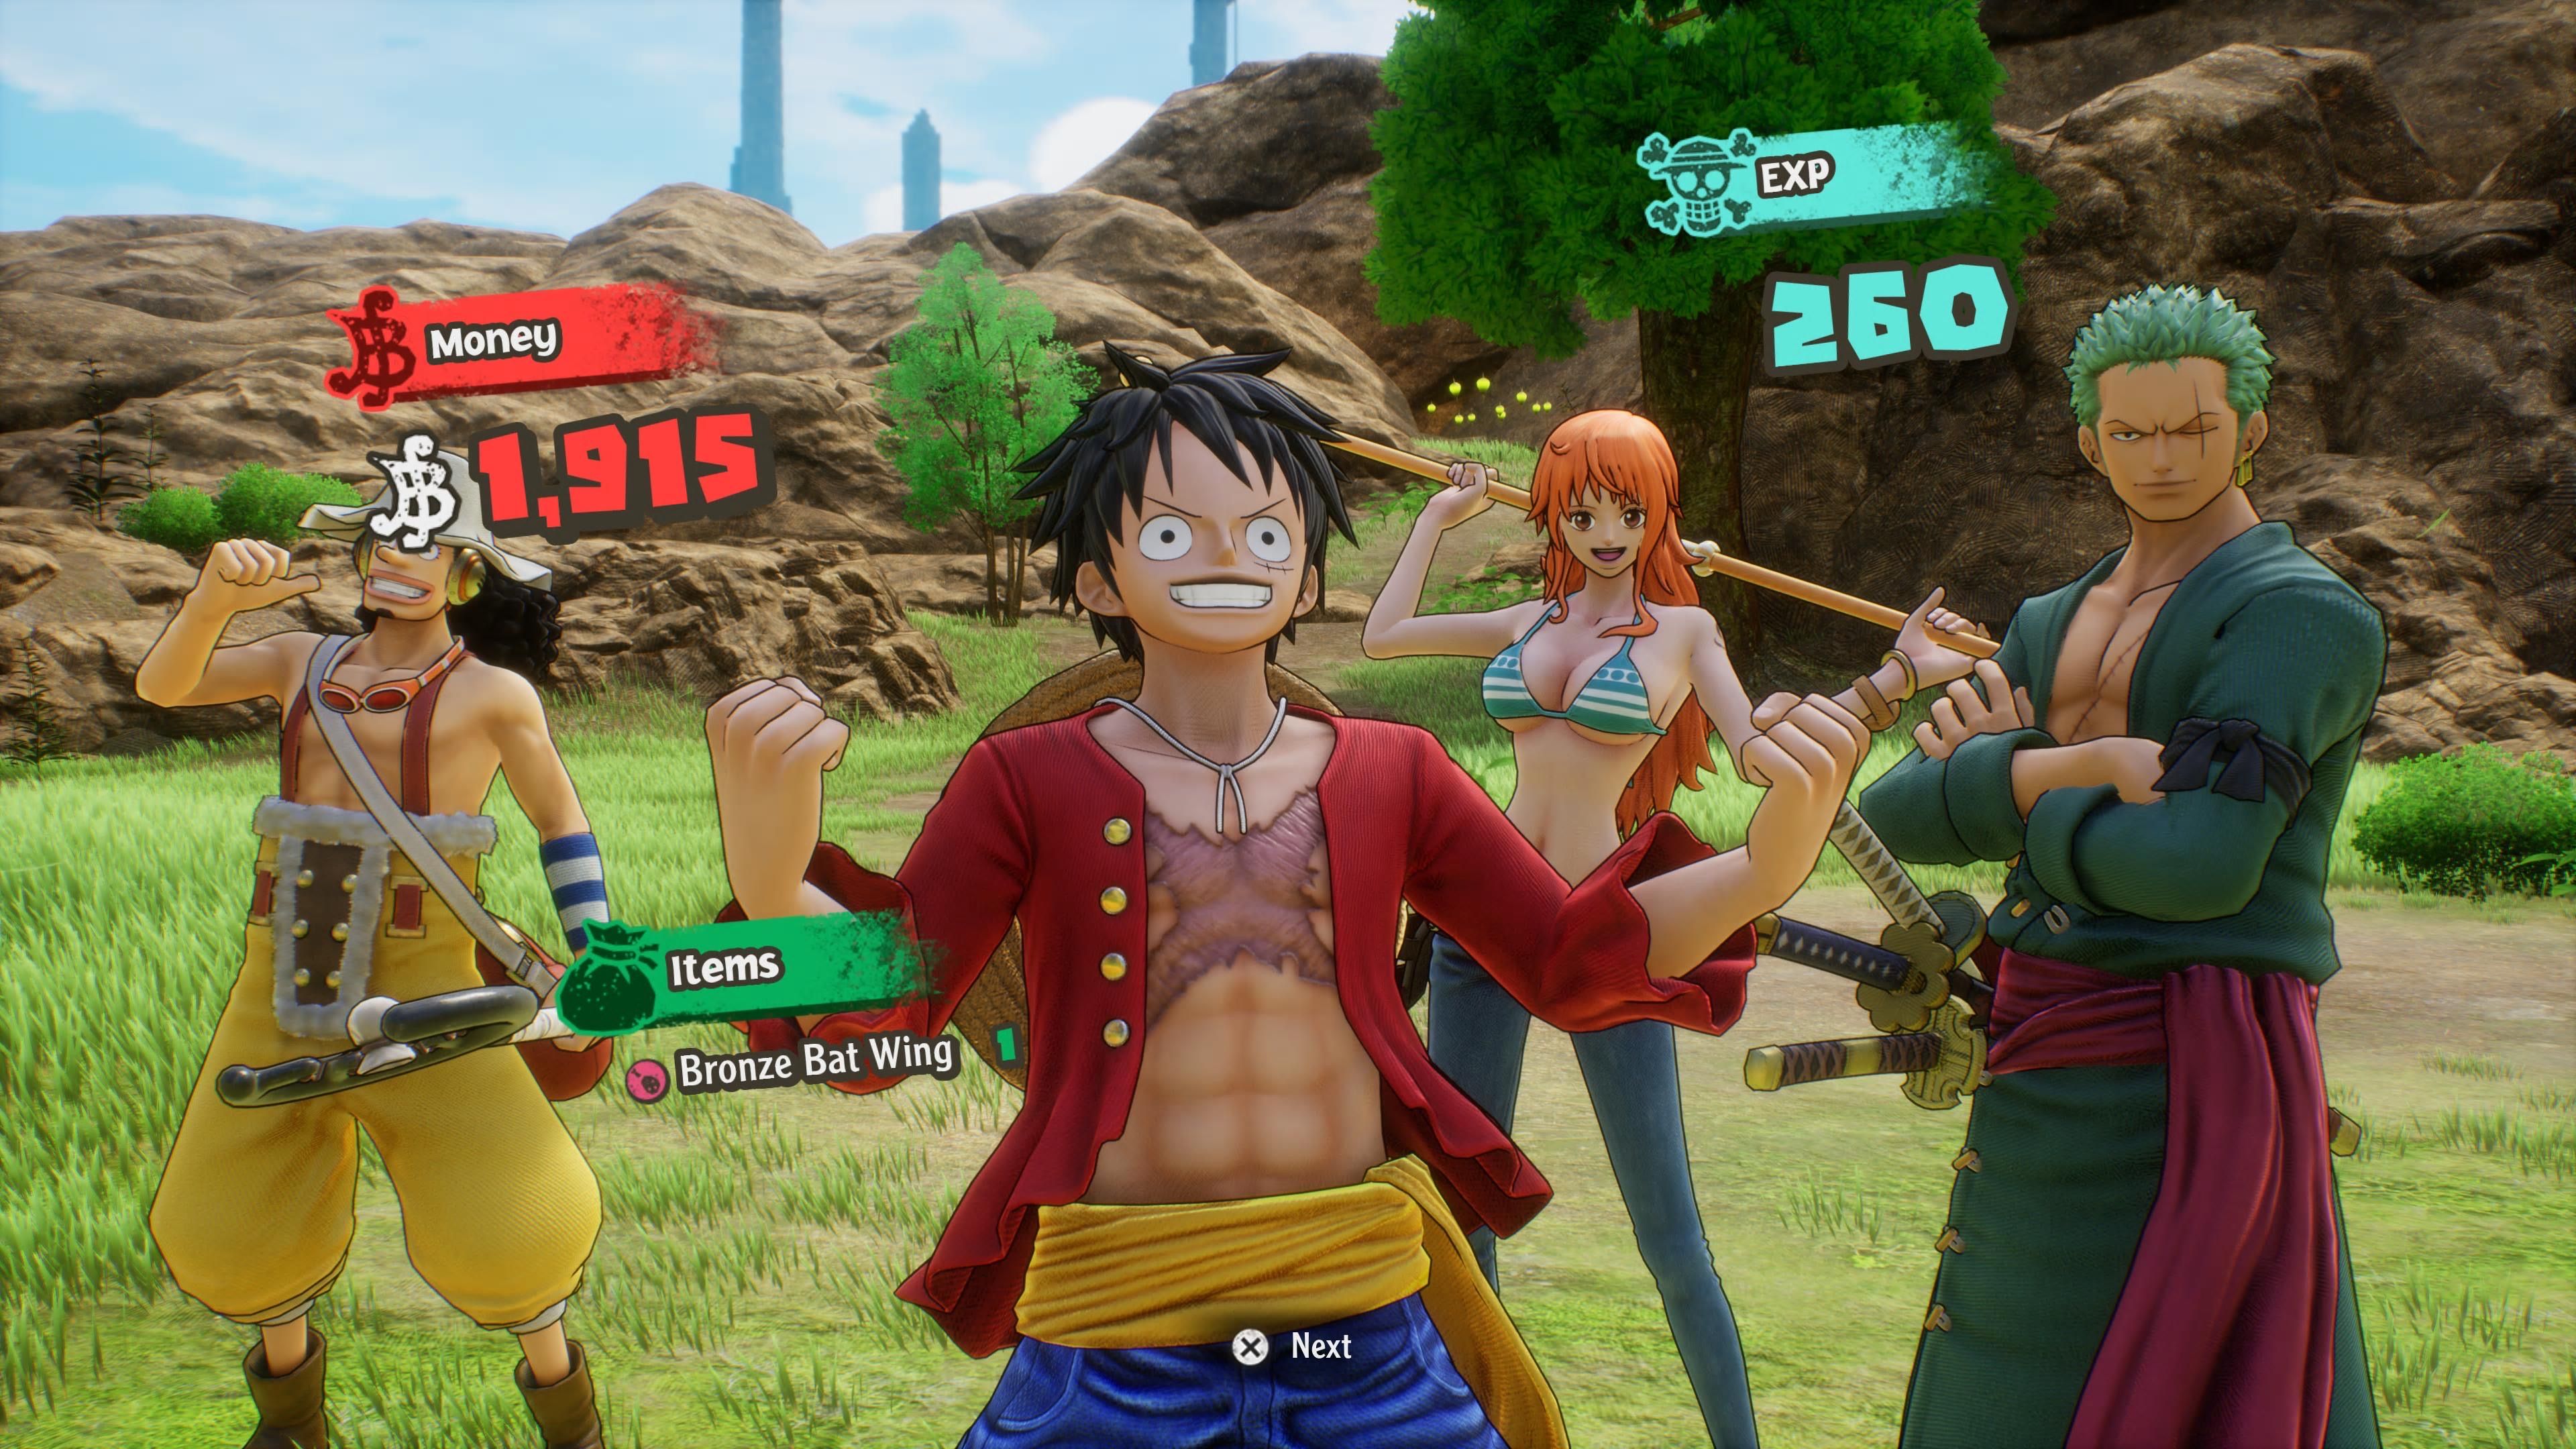 One Piece Odyssey end of battle screen showing XP and Money